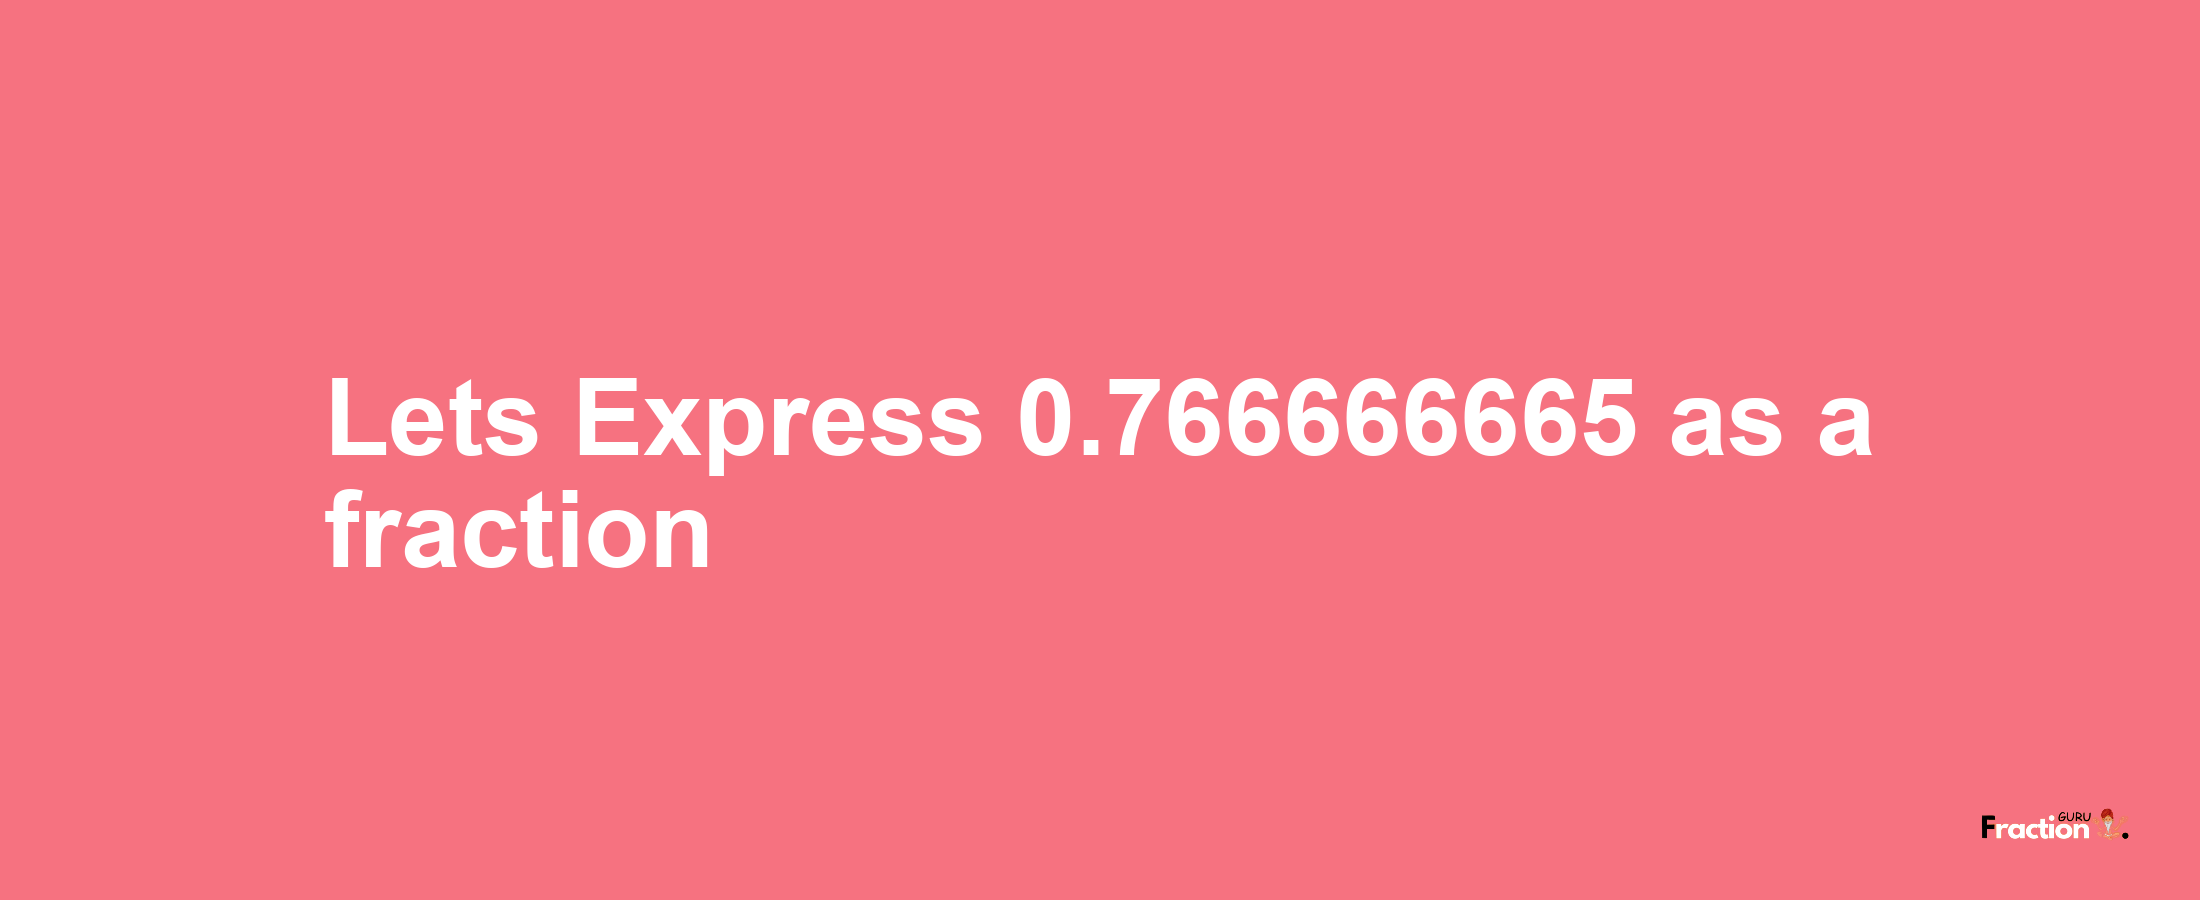 Lets Express 0.766666665 as afraction